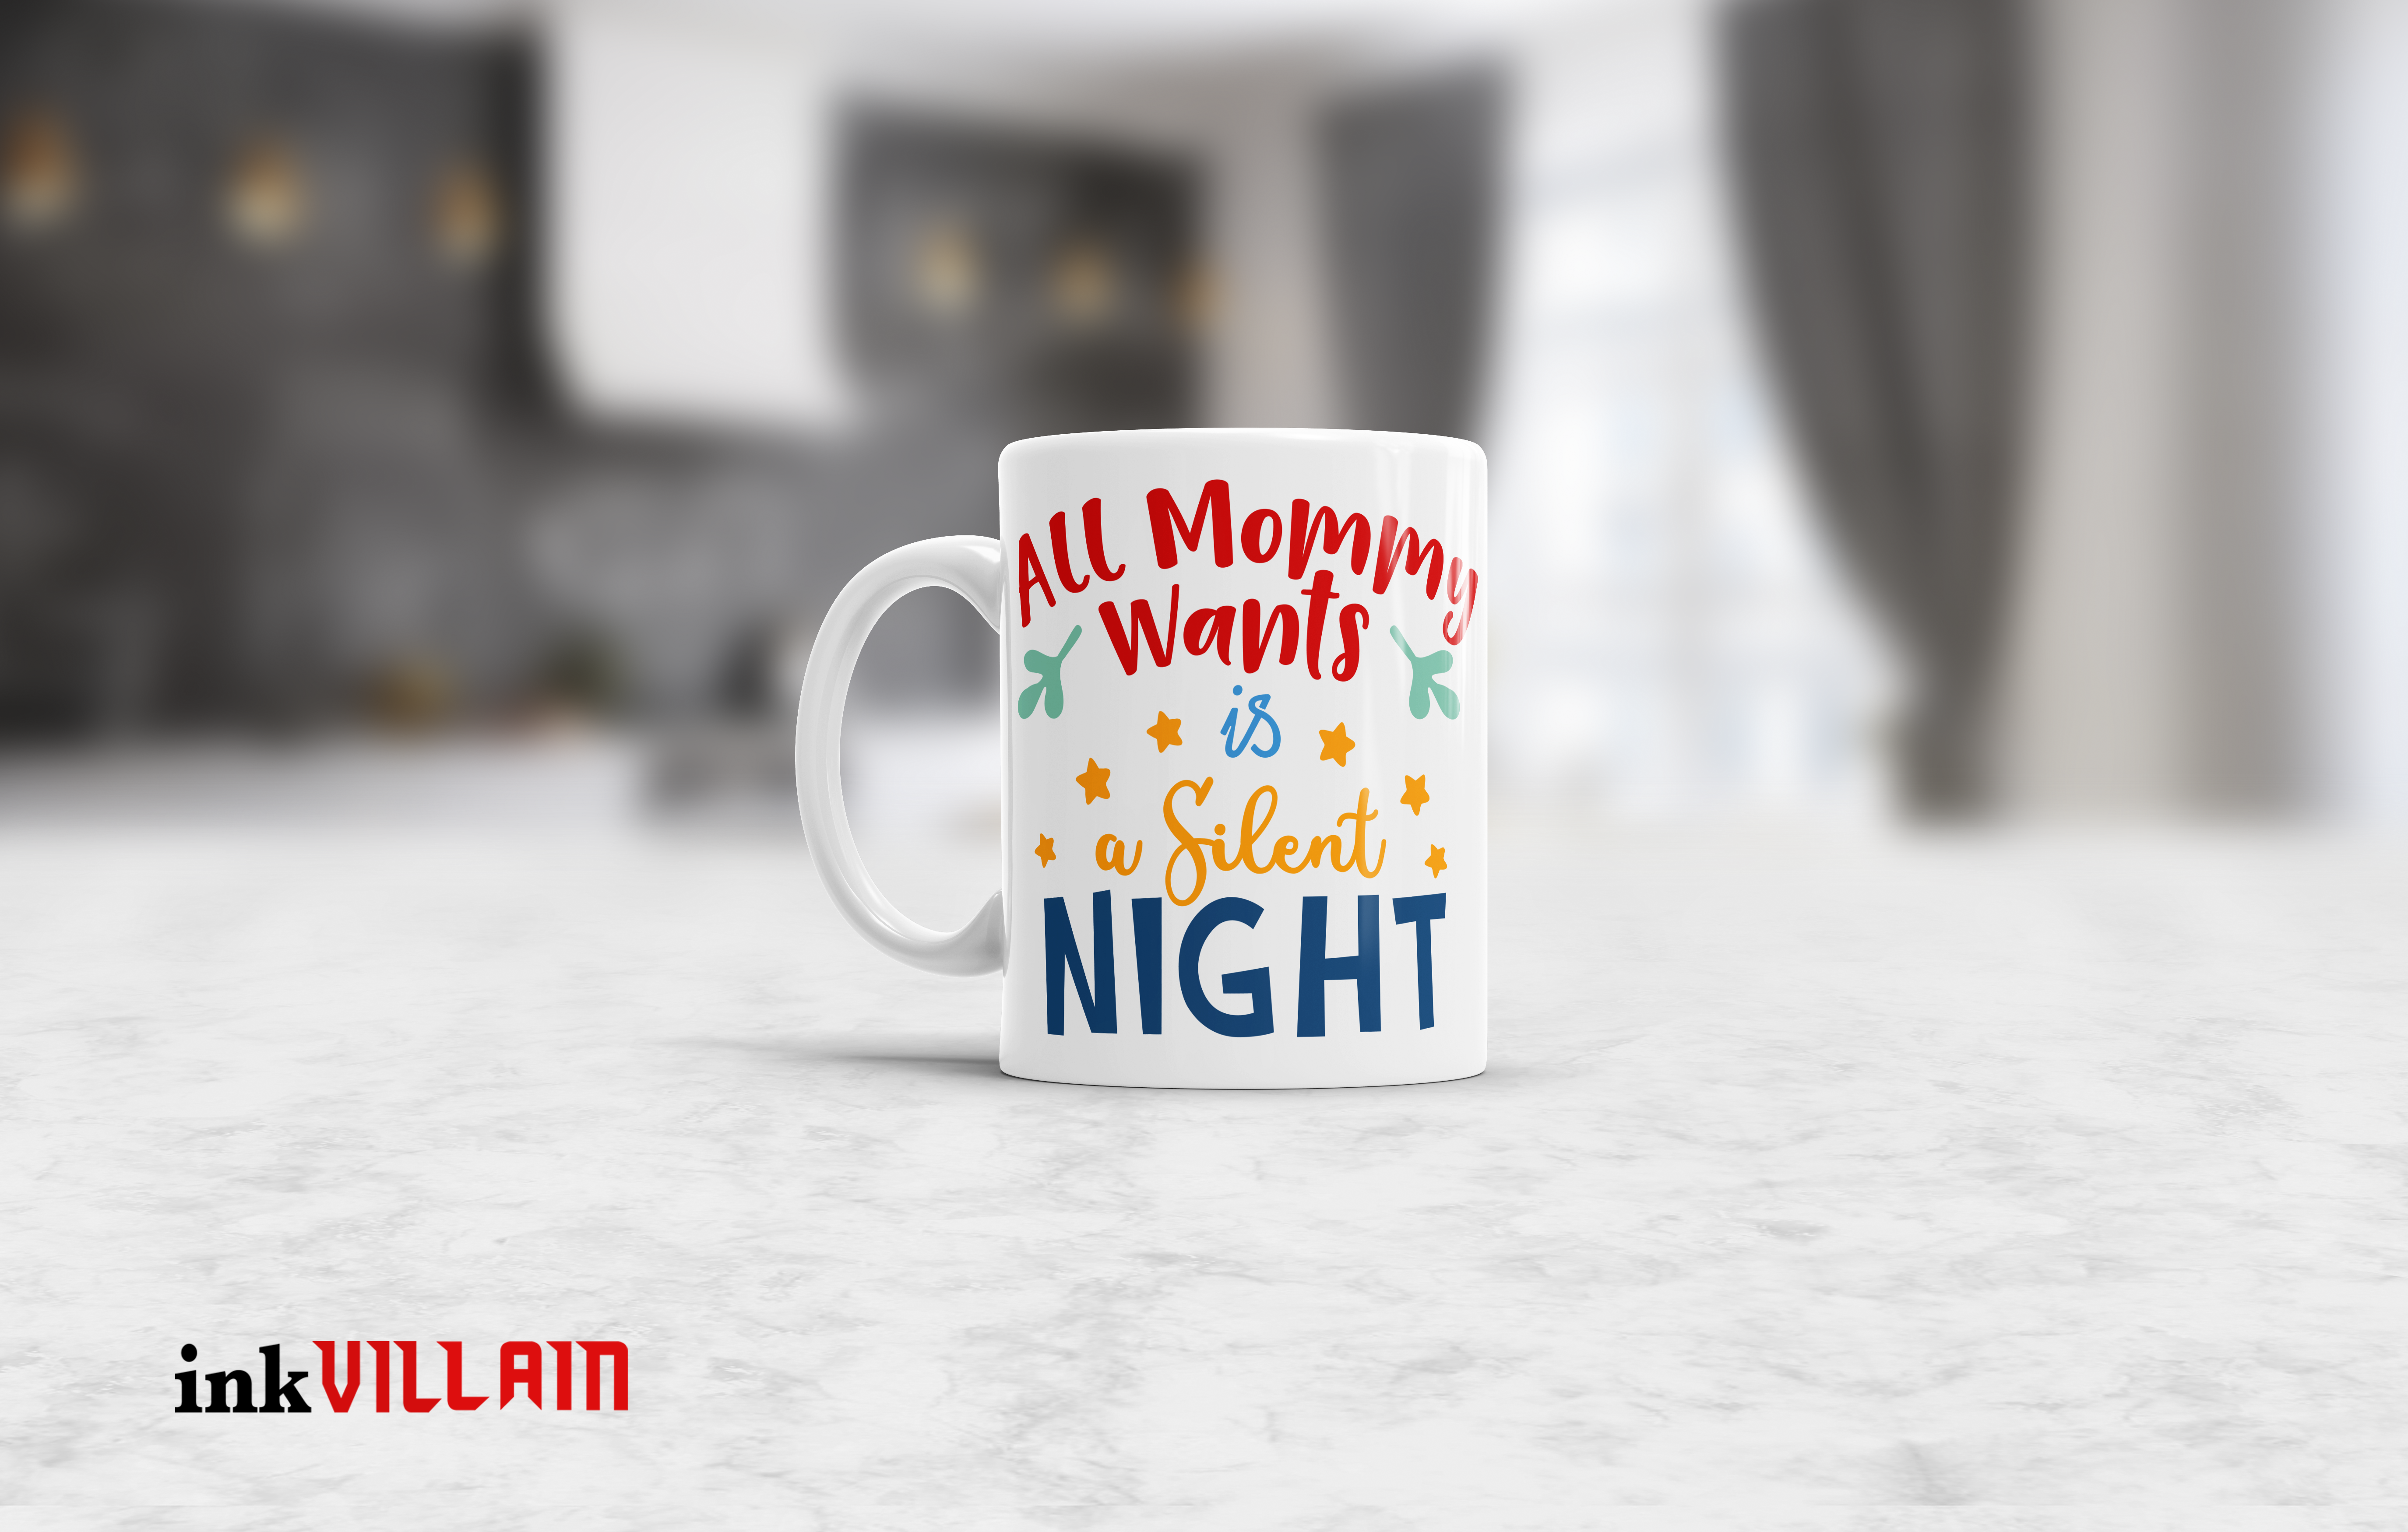 All Mommy Wants Is A Silent Night Coffee Mug